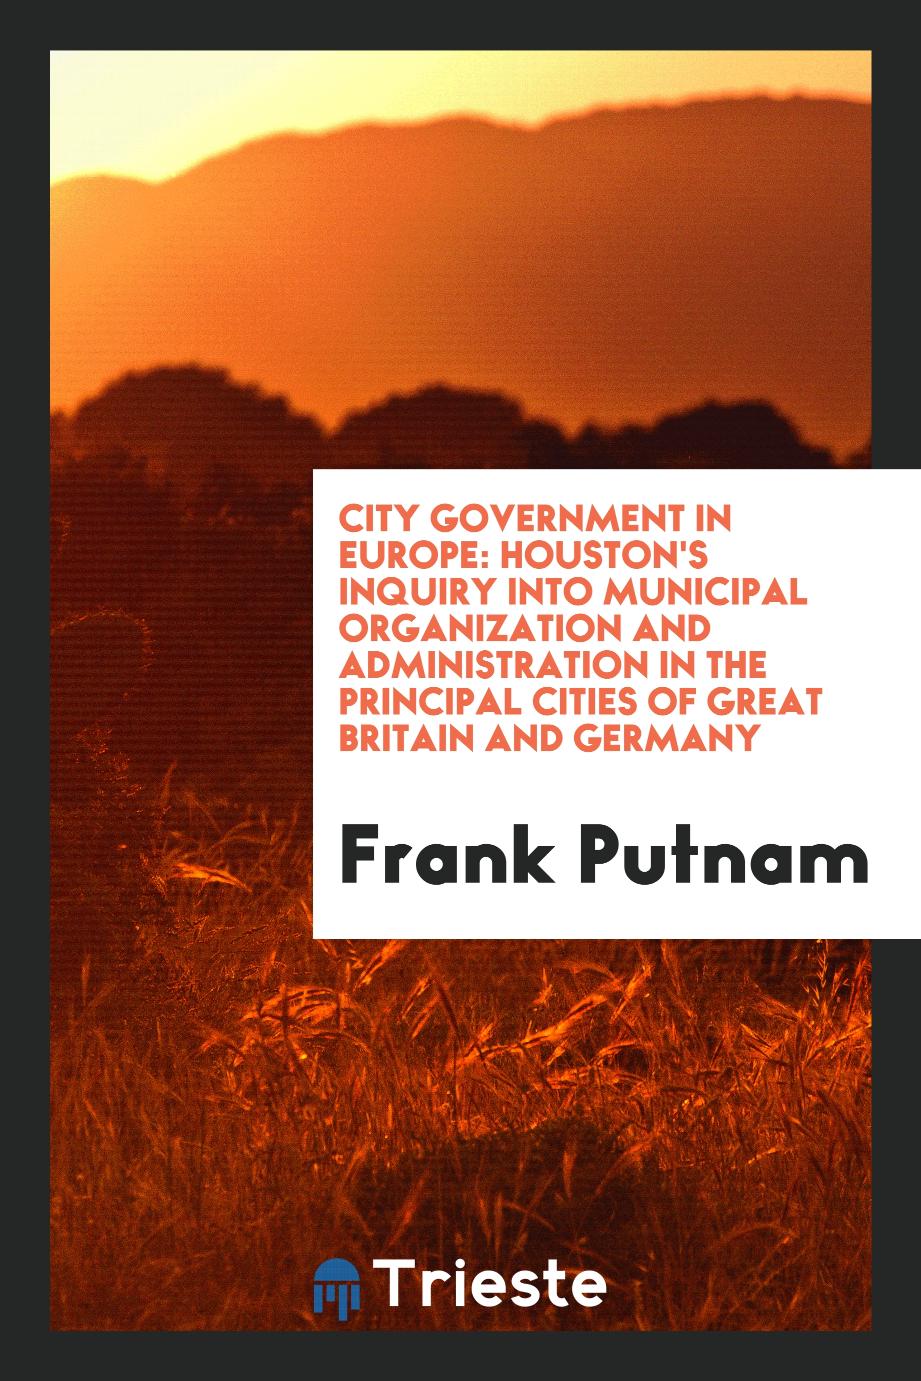 City Government in Europe: Houston's Inquiry Into Municipal Organization and Administration in the Principal Cities of Great Britain and Germany